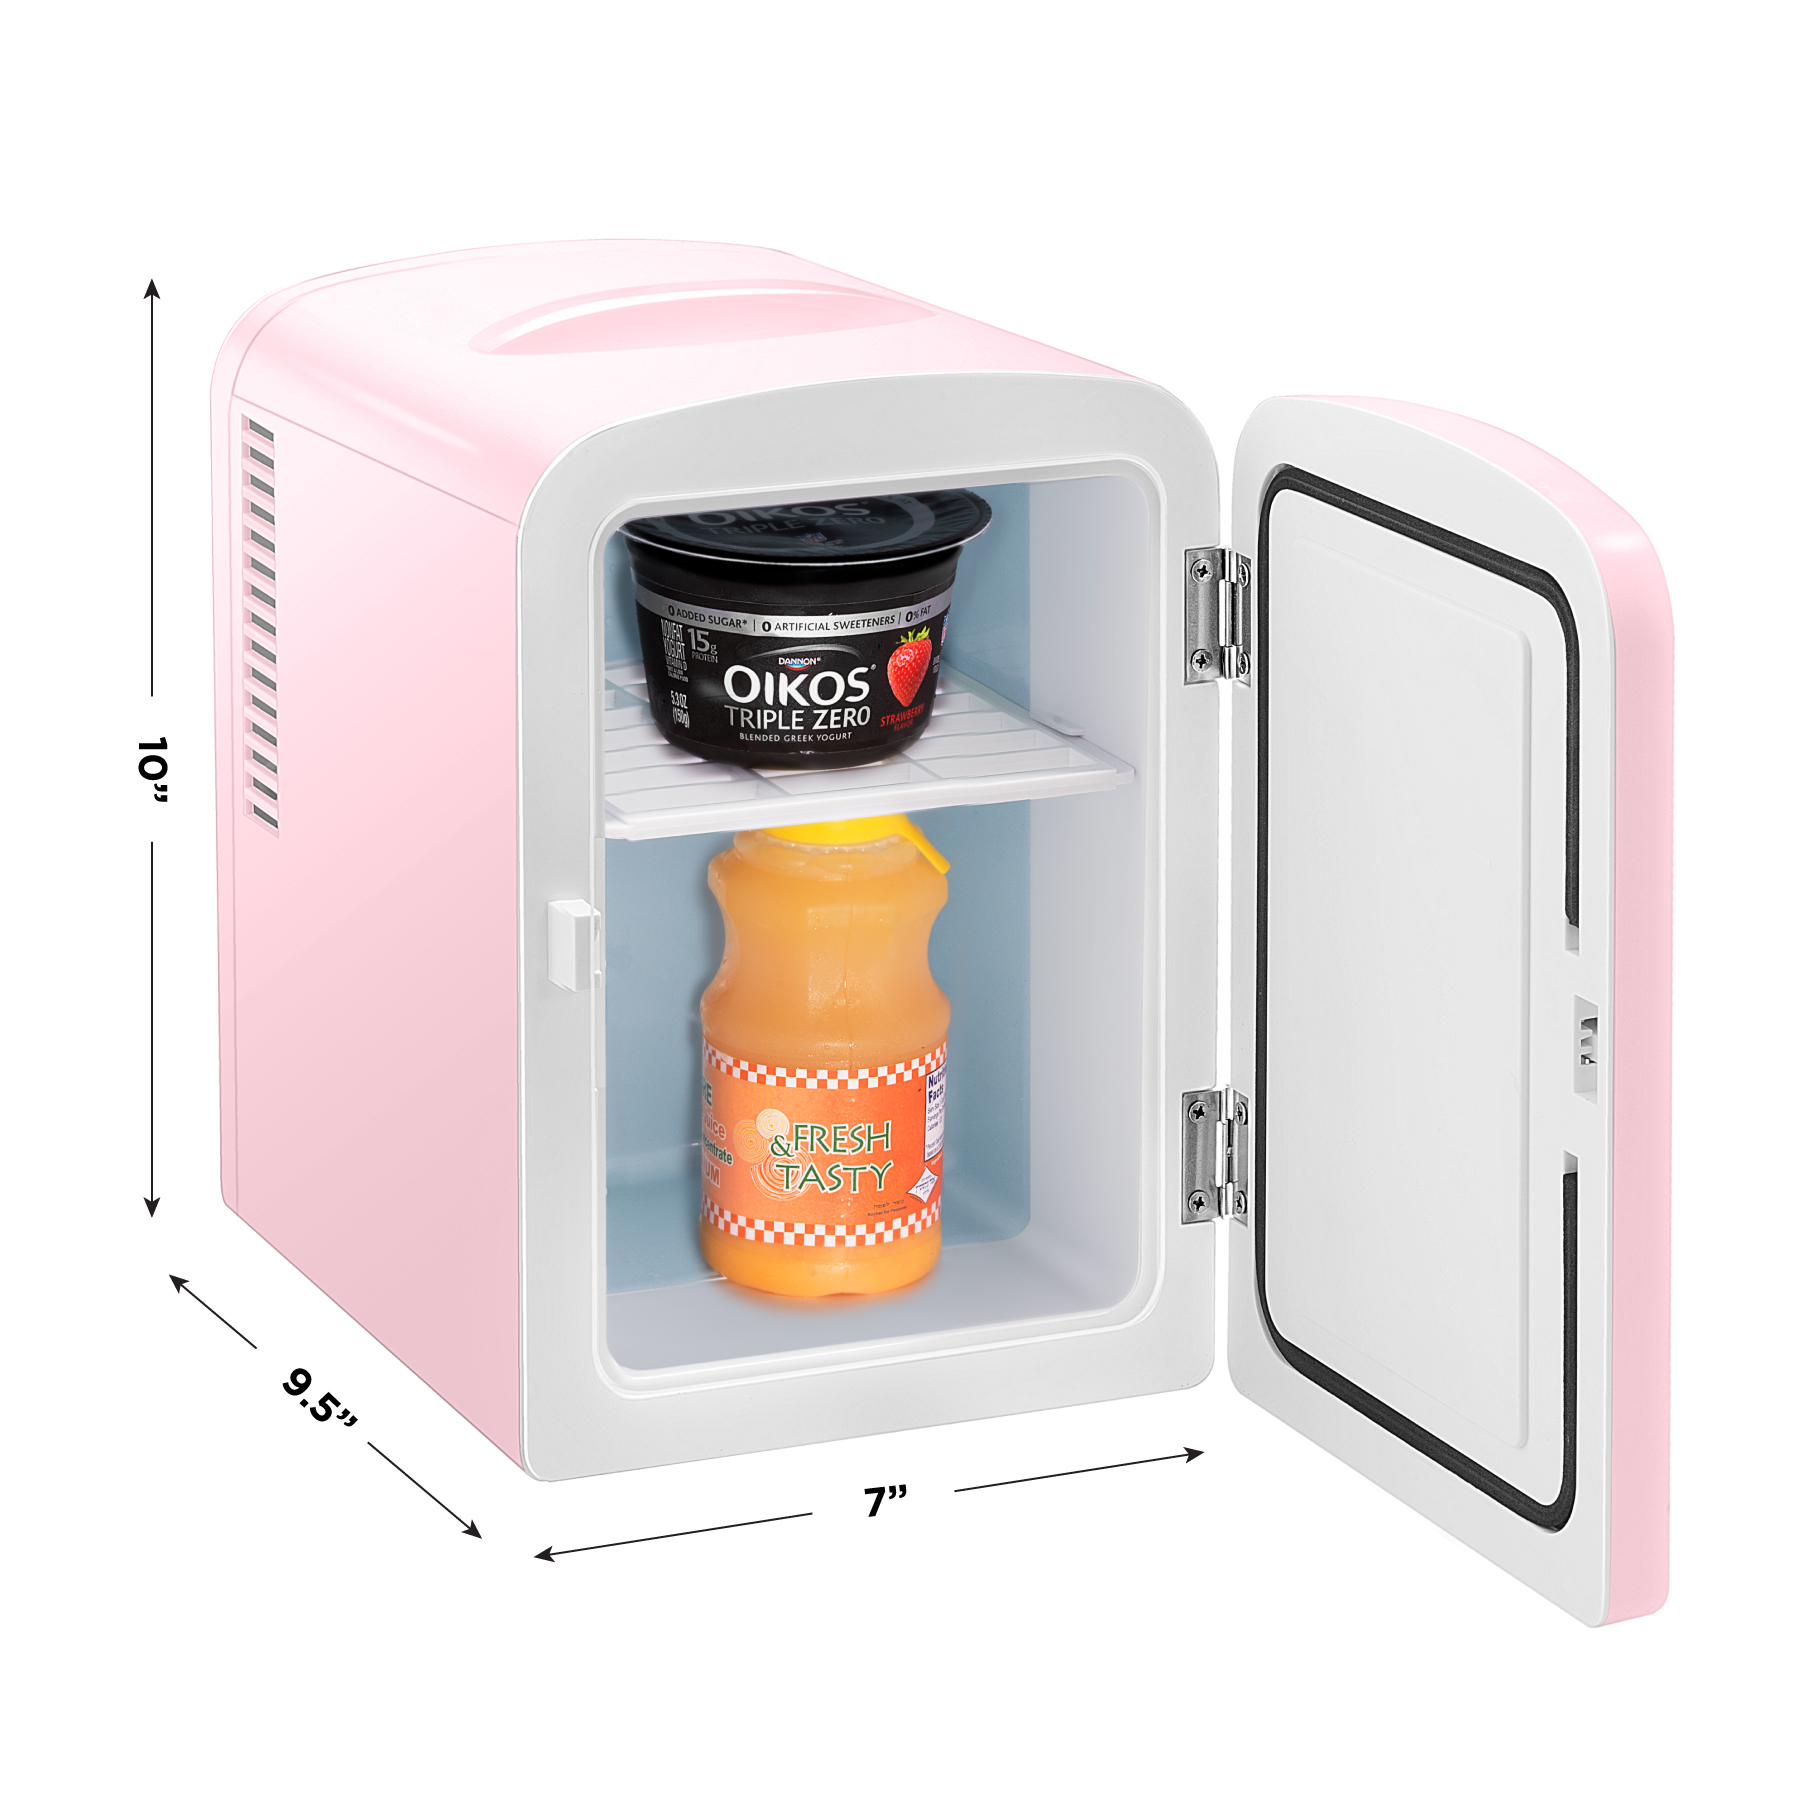 Chefman Portable 4L Mini Fridge w/ Heating and Cooling - Pink, New - image 5 of 5